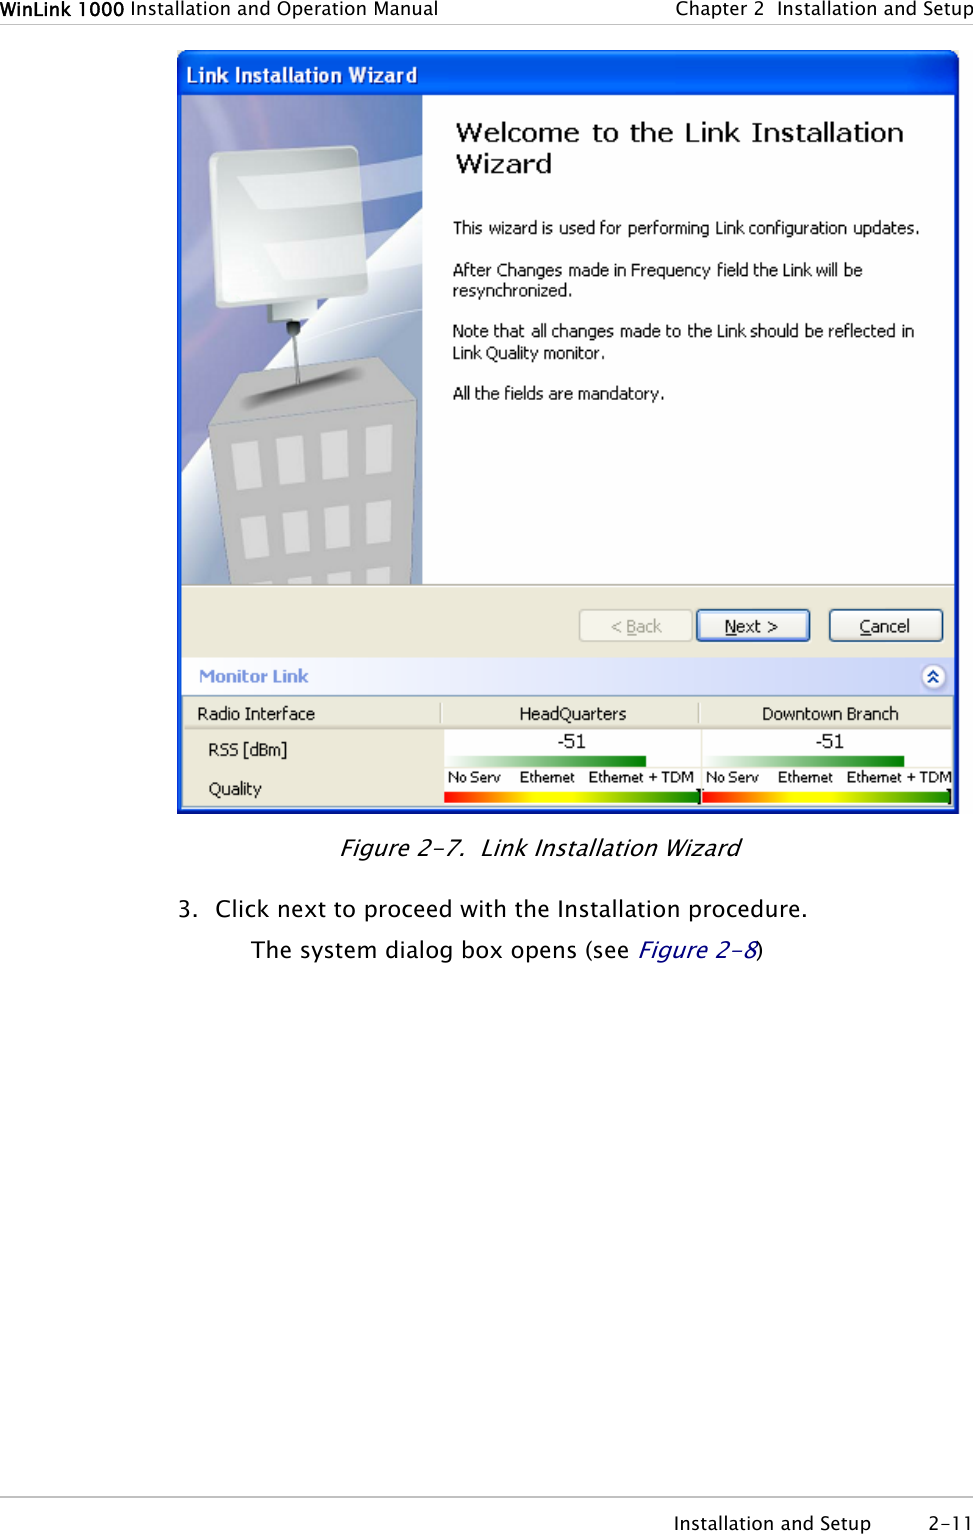 WinLink 1000 Installation and Operation Manual  Chapter 2  Installation and Setup  Installation and Setup  2-11  Figure 2-7.  Link Installation Wizard 3. Click next to proceed with the Installation procedure. The system dialog box opens (see Figure 2-8) 